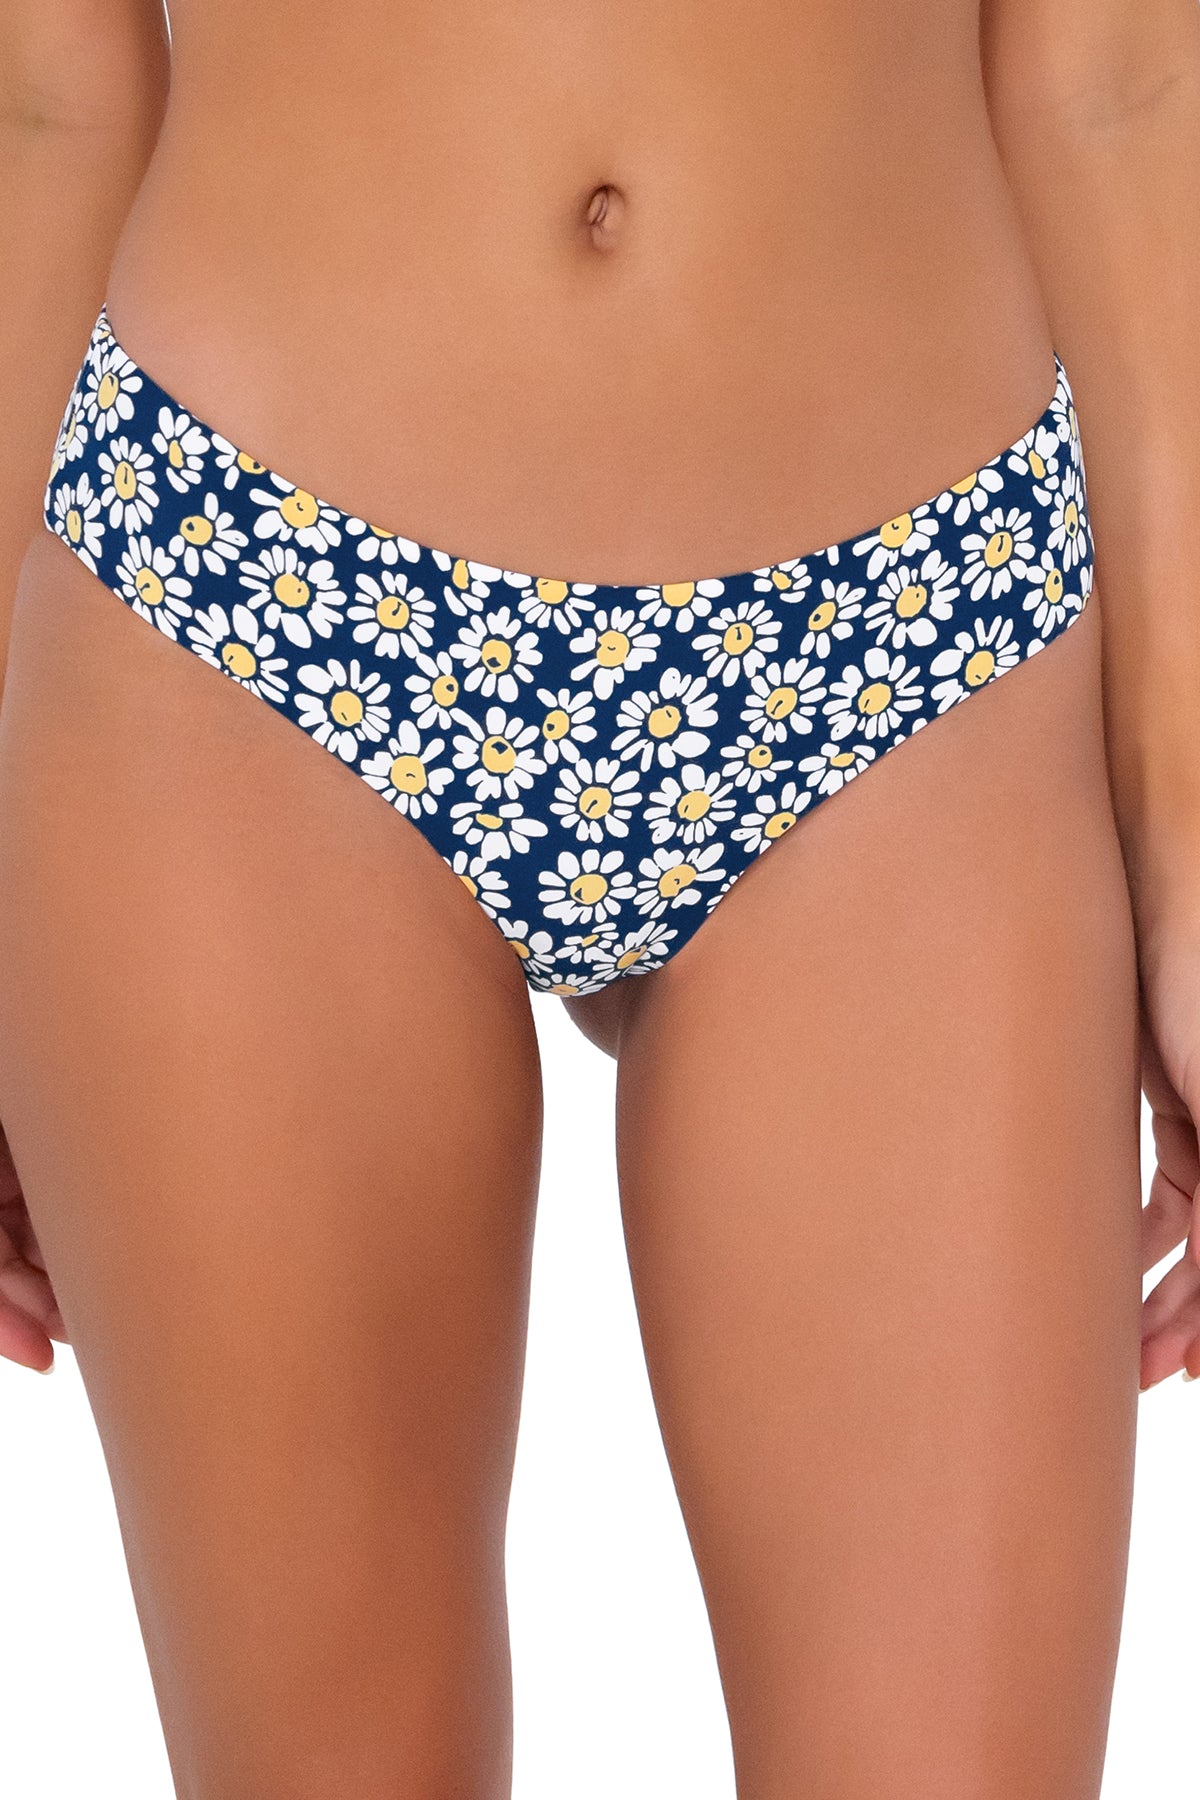 Front pose #1 of Jessica wearing Swim Systems Flower Field Hazel Hipster Bottom